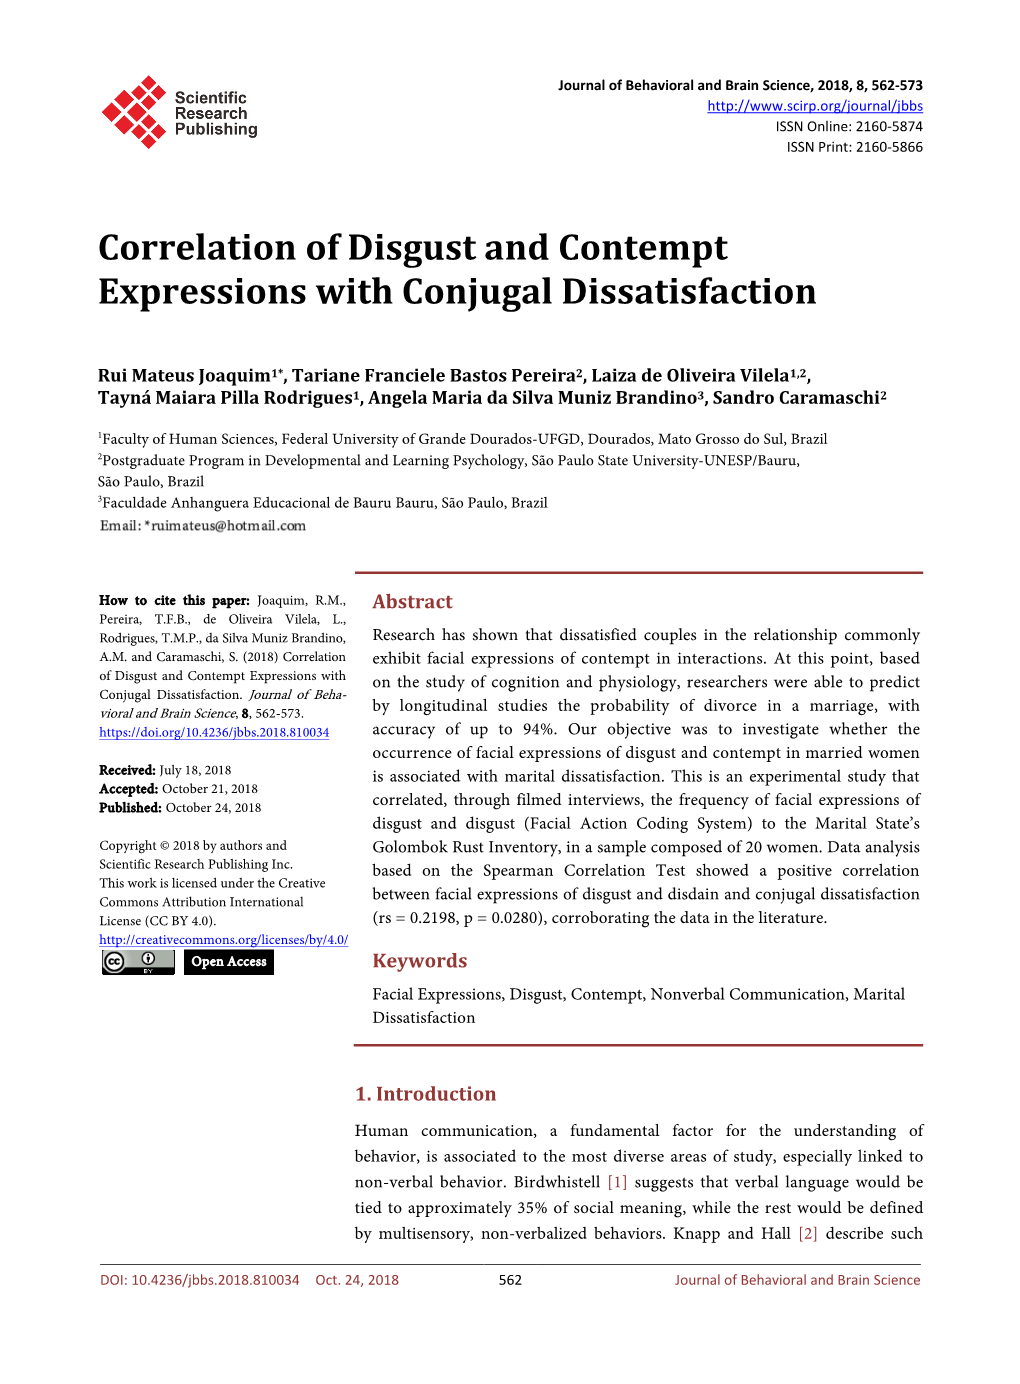 Correlation of Disgust and Contempt Expressions with Conjugal Dissatisfaction